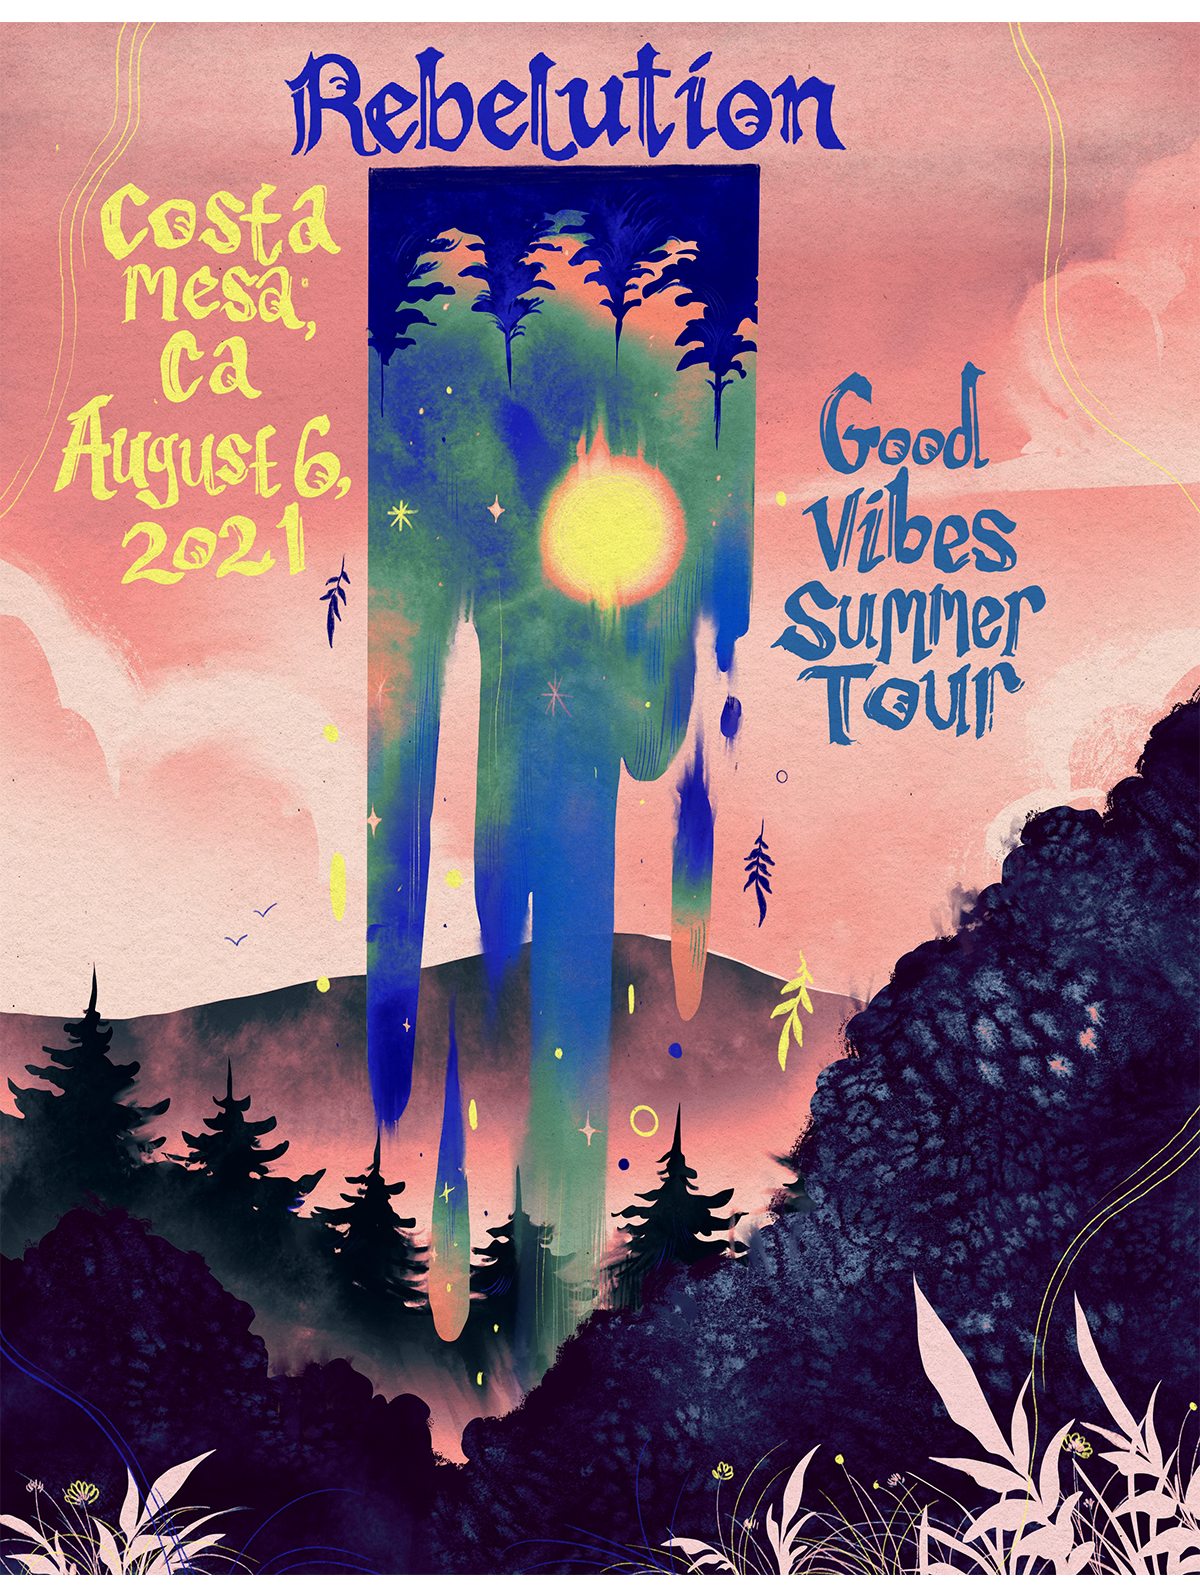 Costa Mesa, CA - August 6, 2021 Event Poster